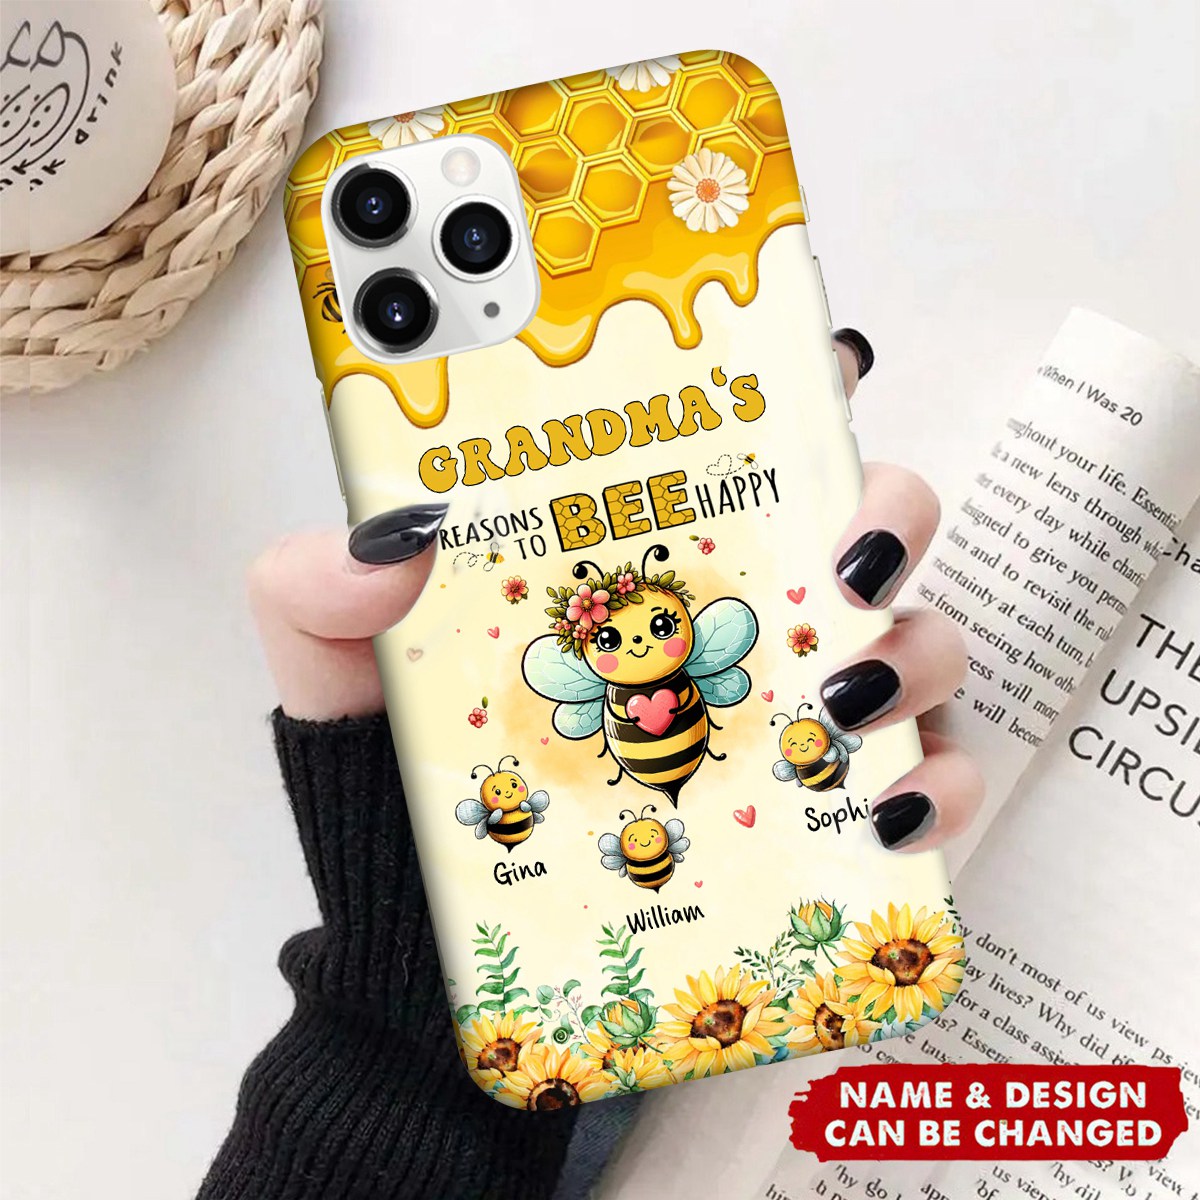 Grandma's reasons to bee happy Personalized Phone case